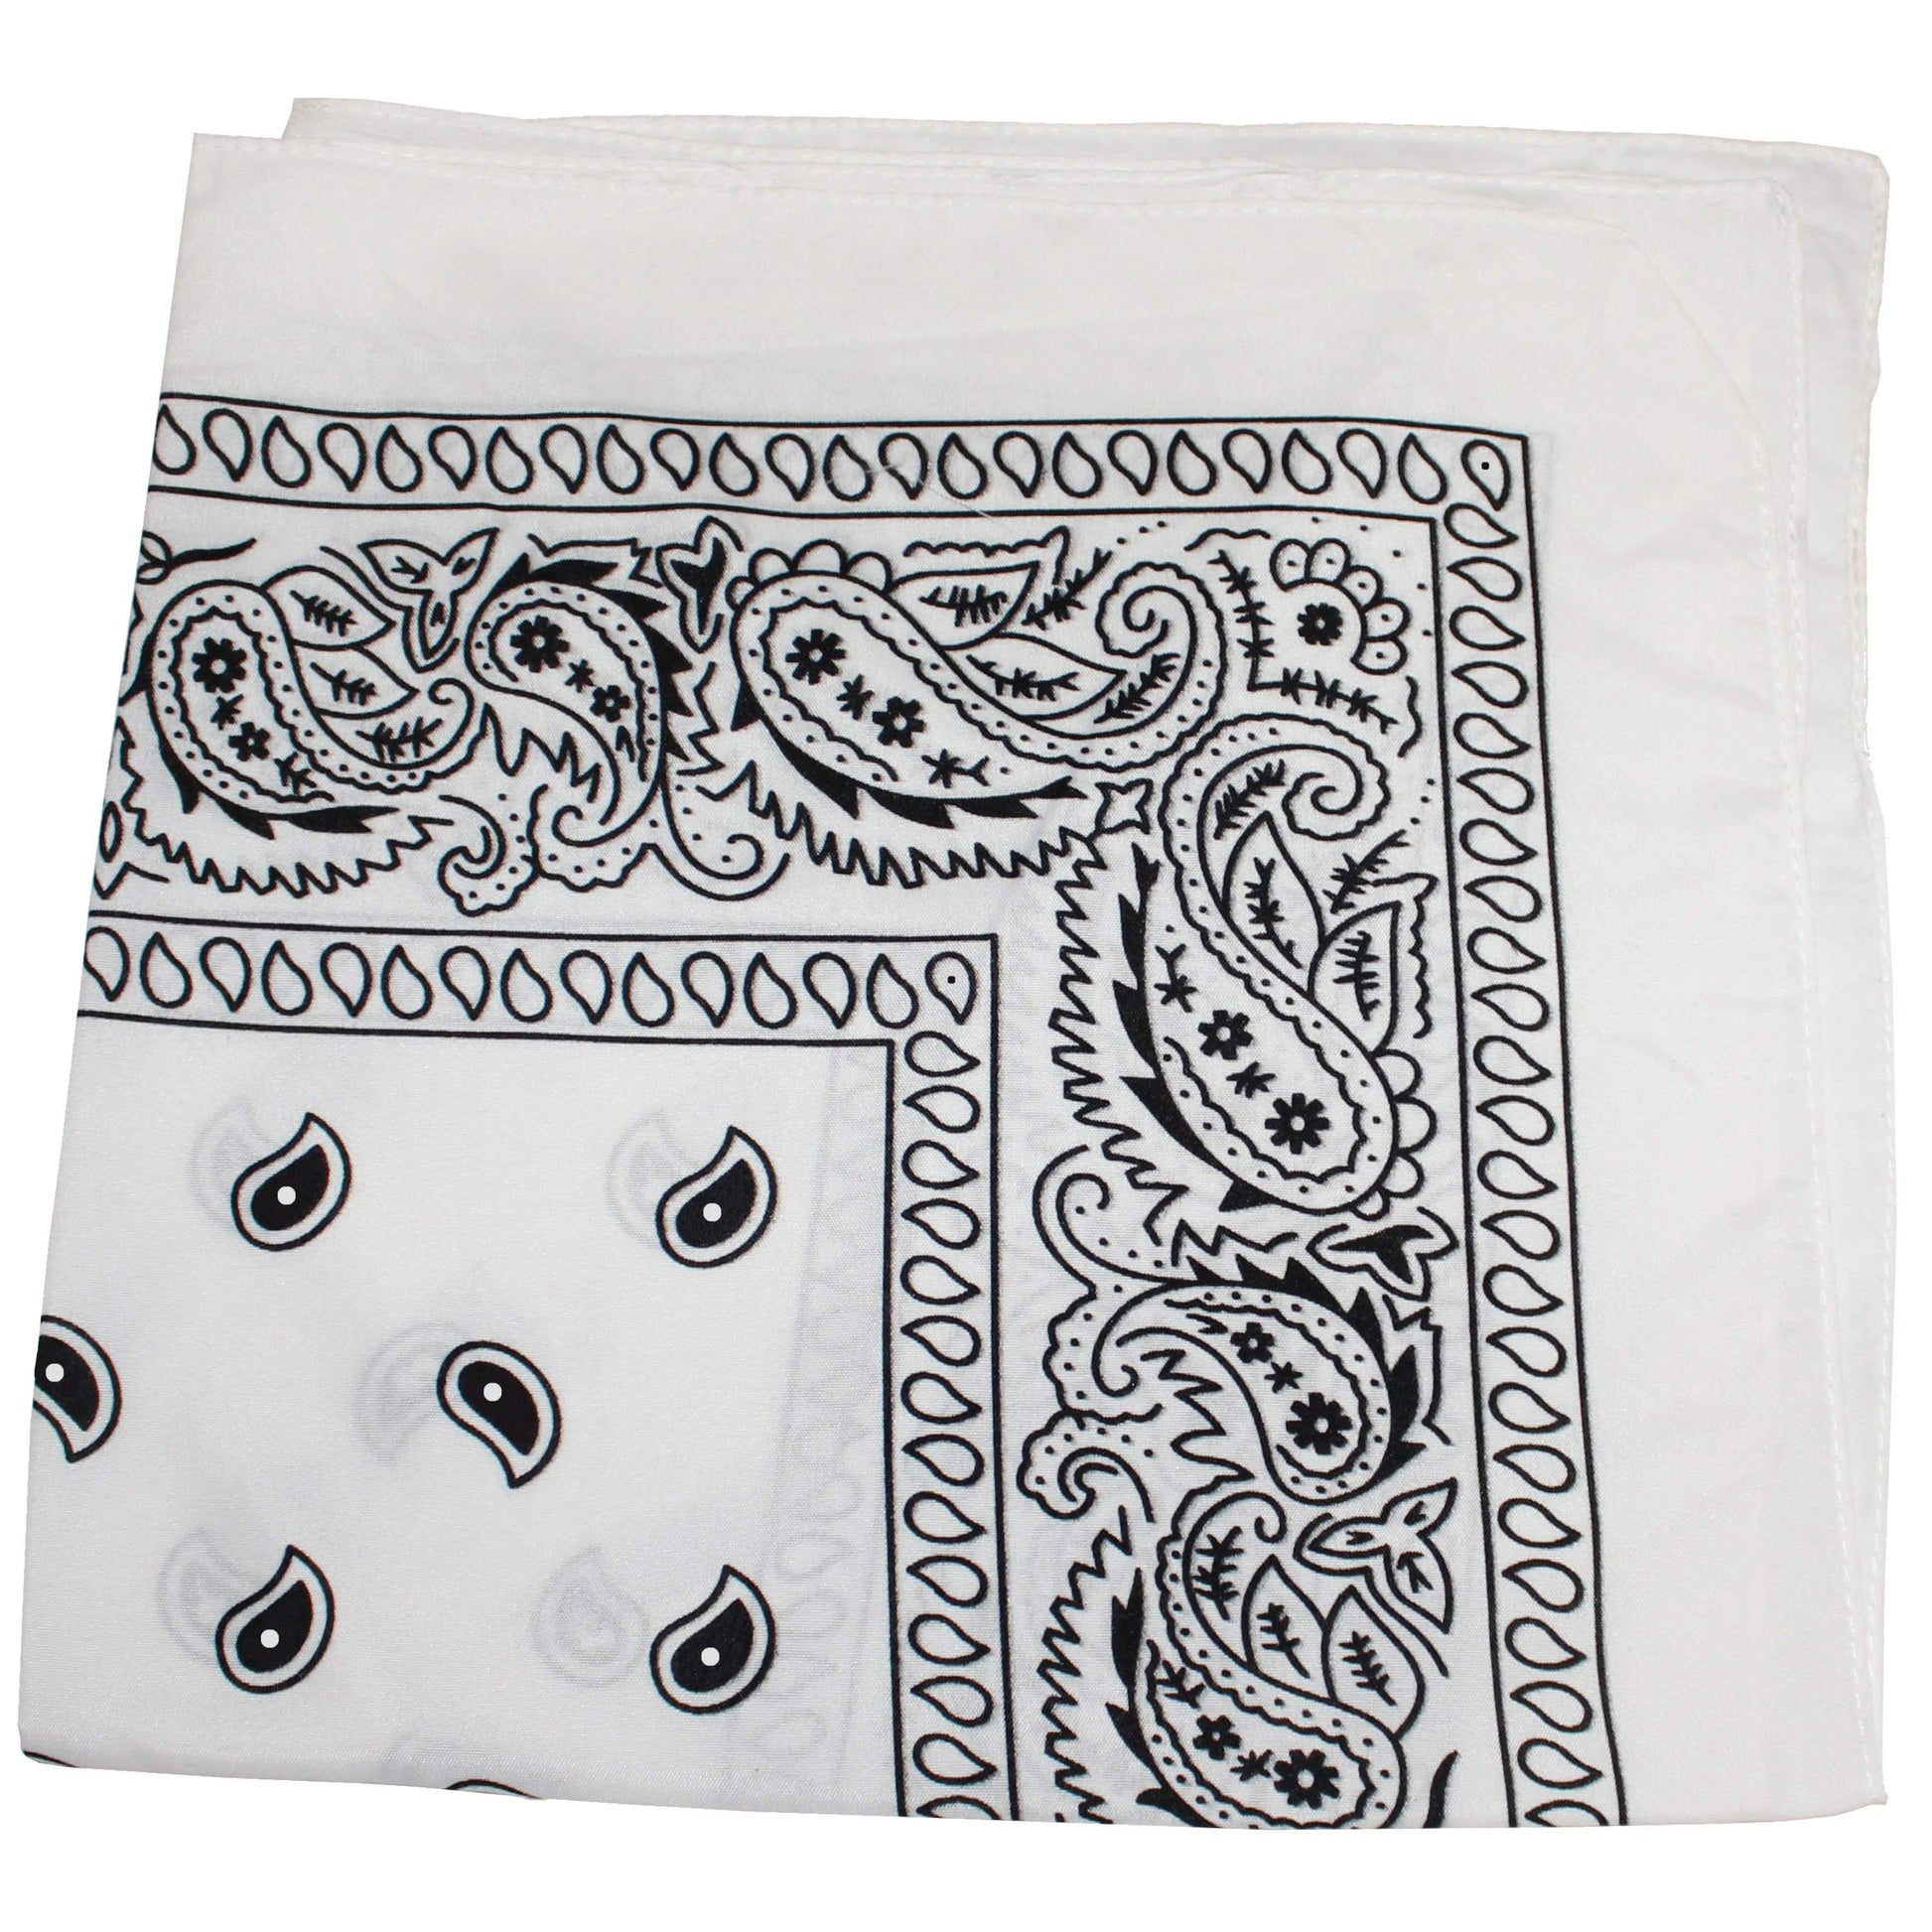 Pack of 5 X-Large Paisley Cotton Printed Bandana - 27 x 27 inches